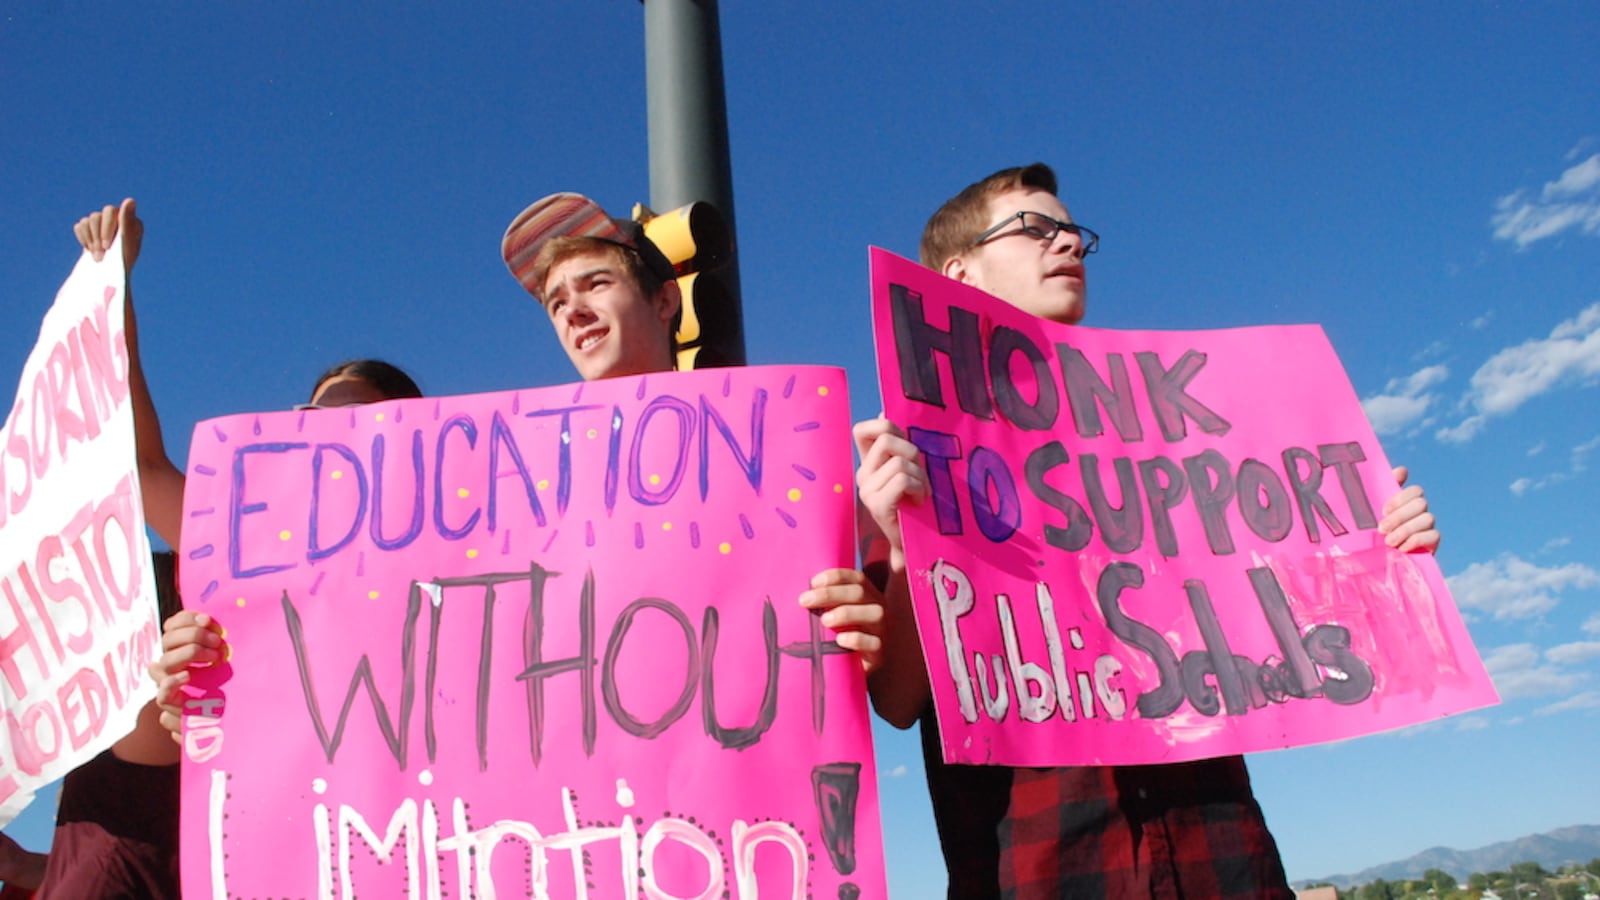 Jeffco Public Schools students took to the streets for a week in September to protest a proposed curriculum review committee they believed would censor some of their classes.